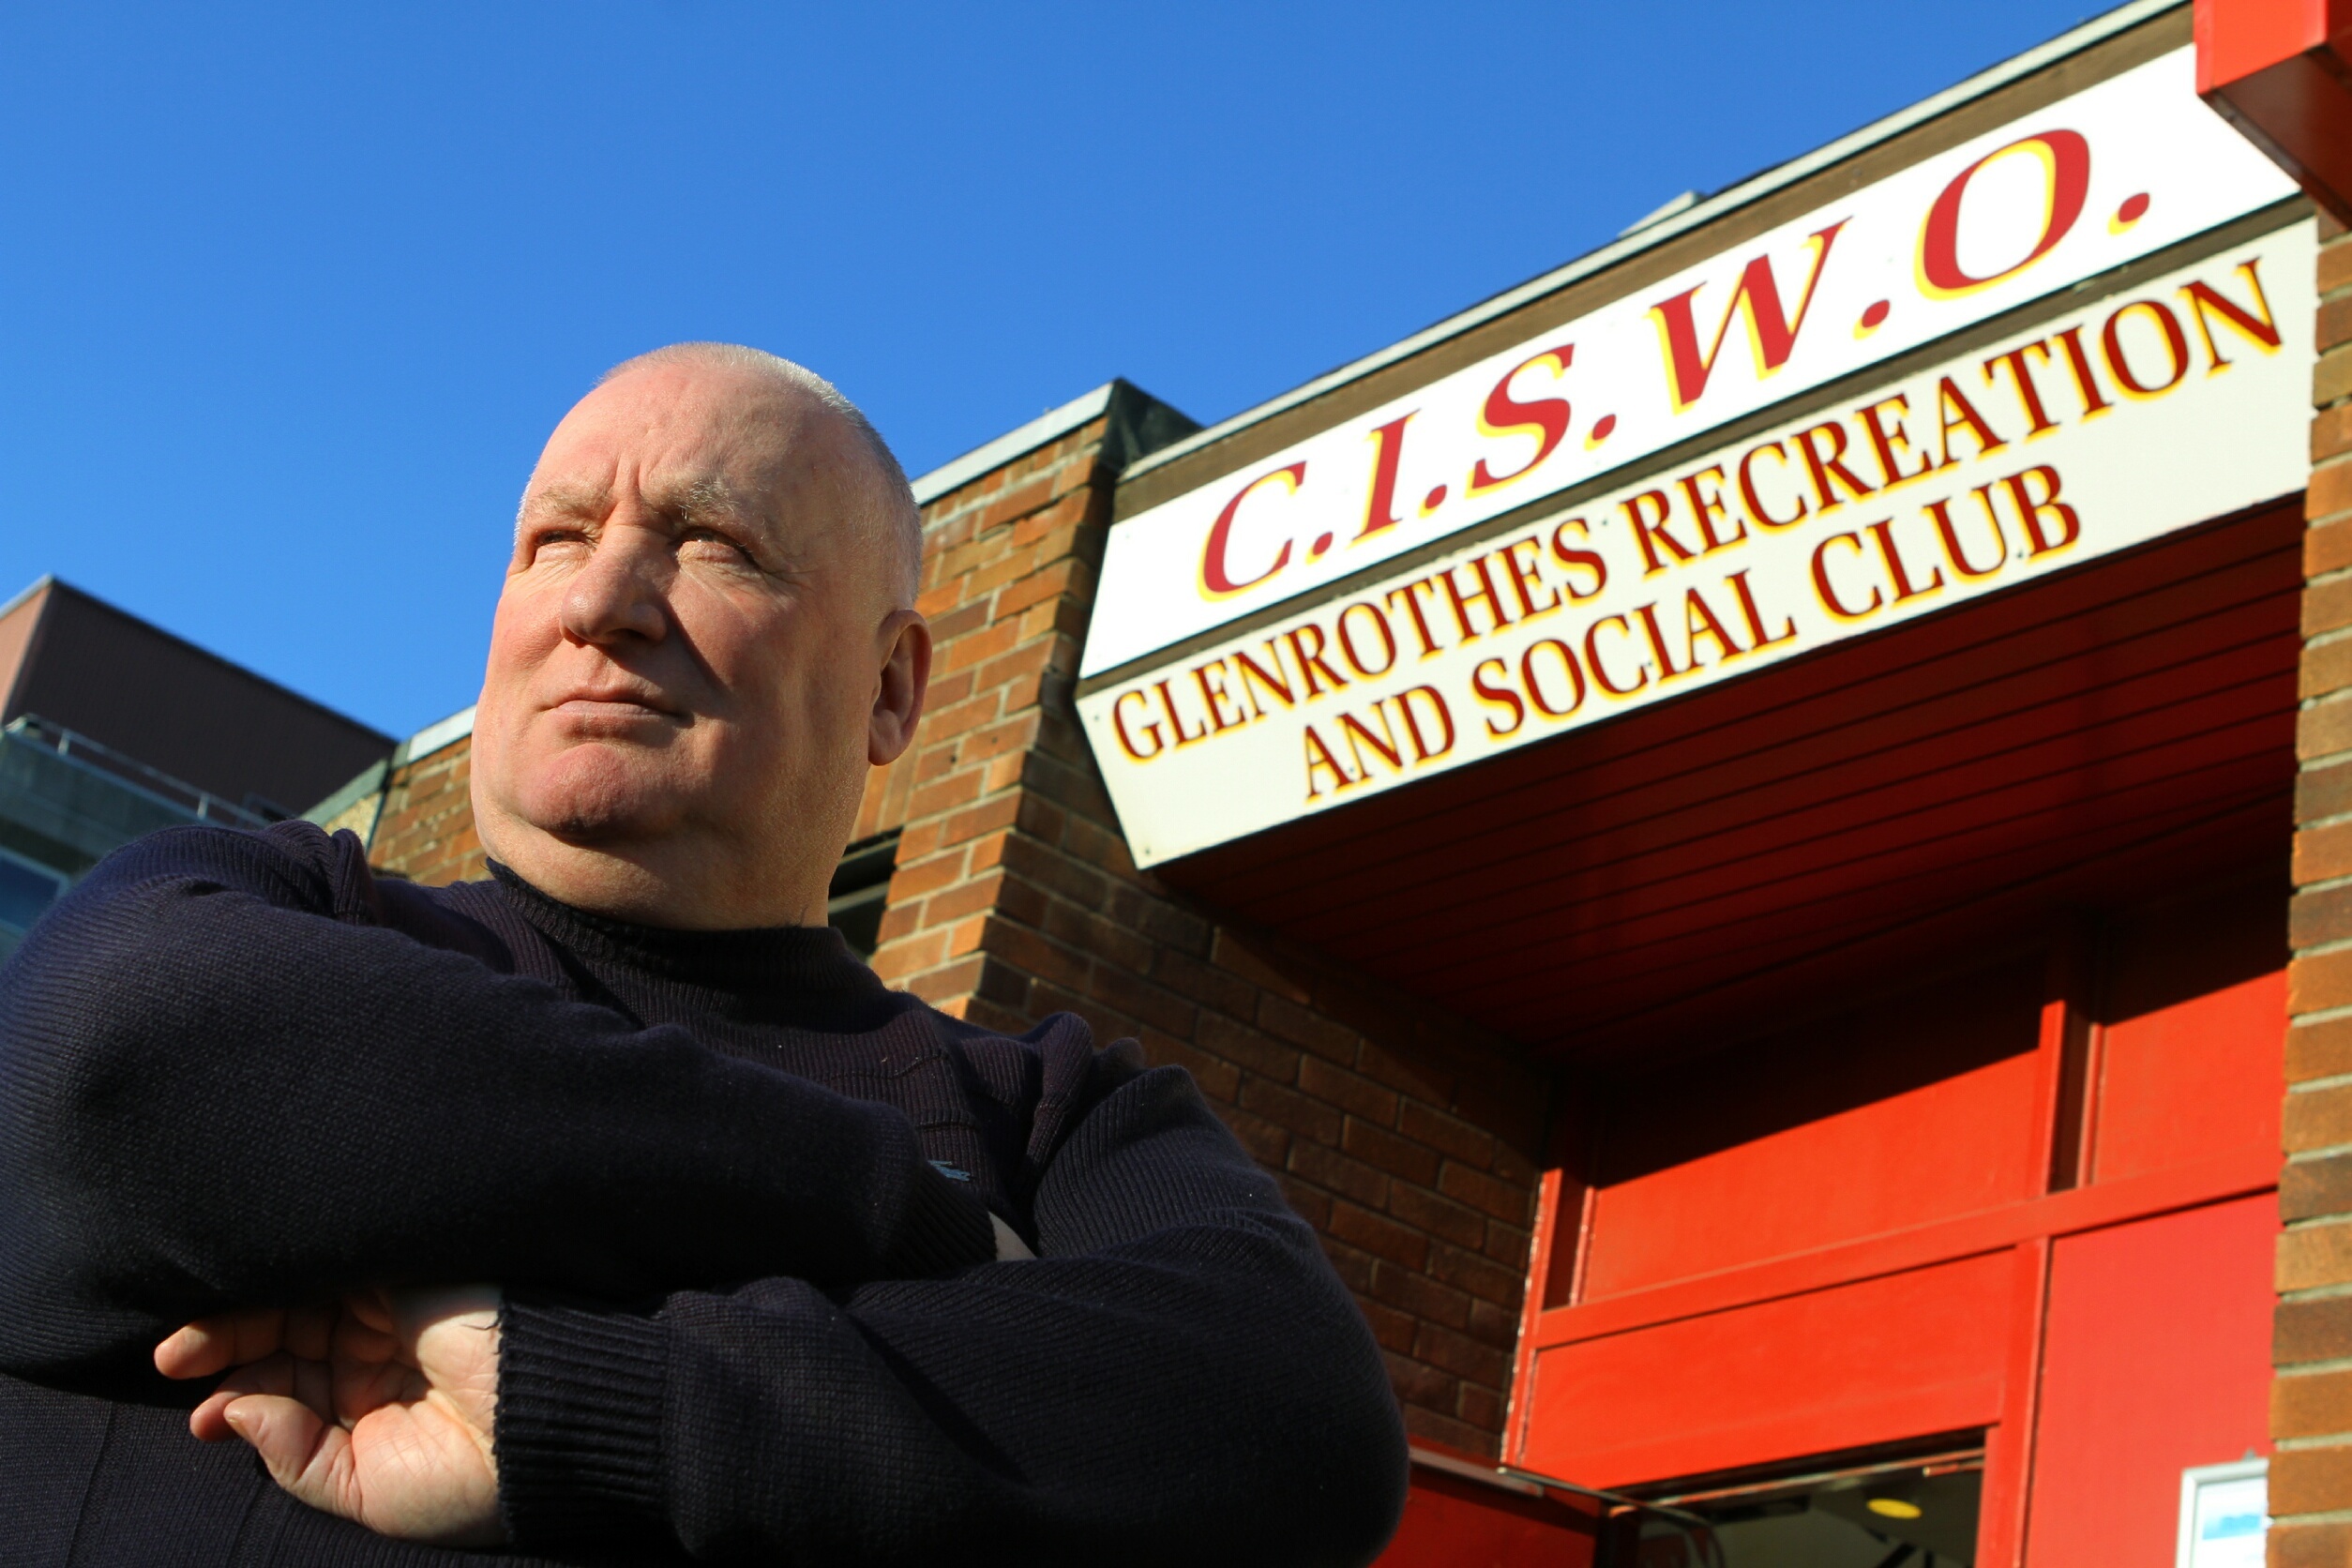 David Nelson outside the CISWO in Glenrothes.